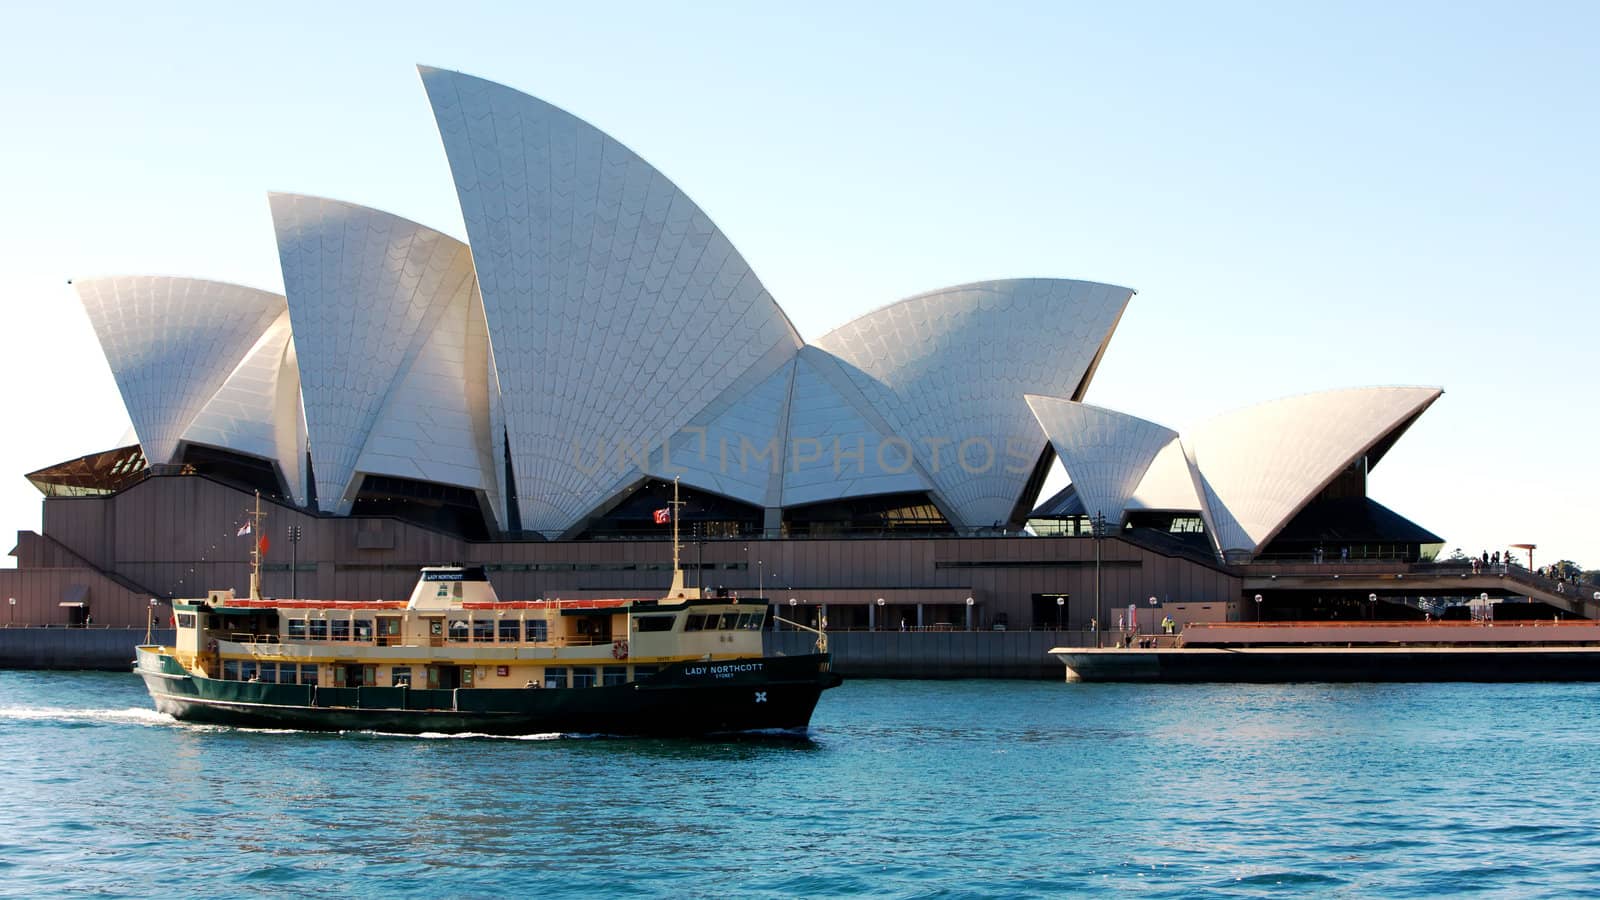 Sydney Opera House in Australia with a ferry boat